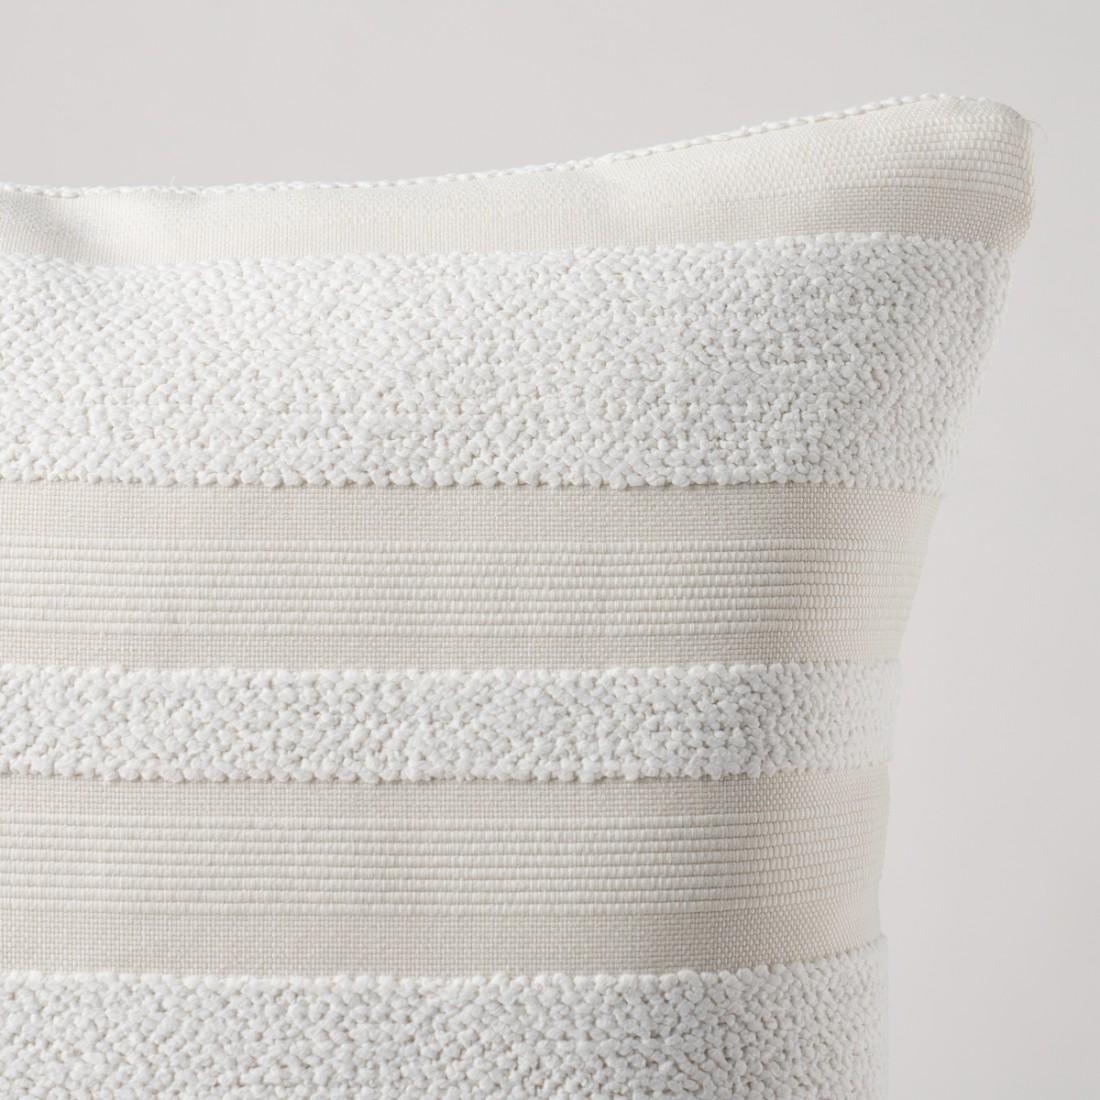 This pillow features Ohara Stripe I/O with a knife edge finish. This next-gen indoor-outdoor fabric is a woven stripe that marries durability with the decadent look and feel of a bouclé. Pillow includes a feather/down fill insert and hidden zipper